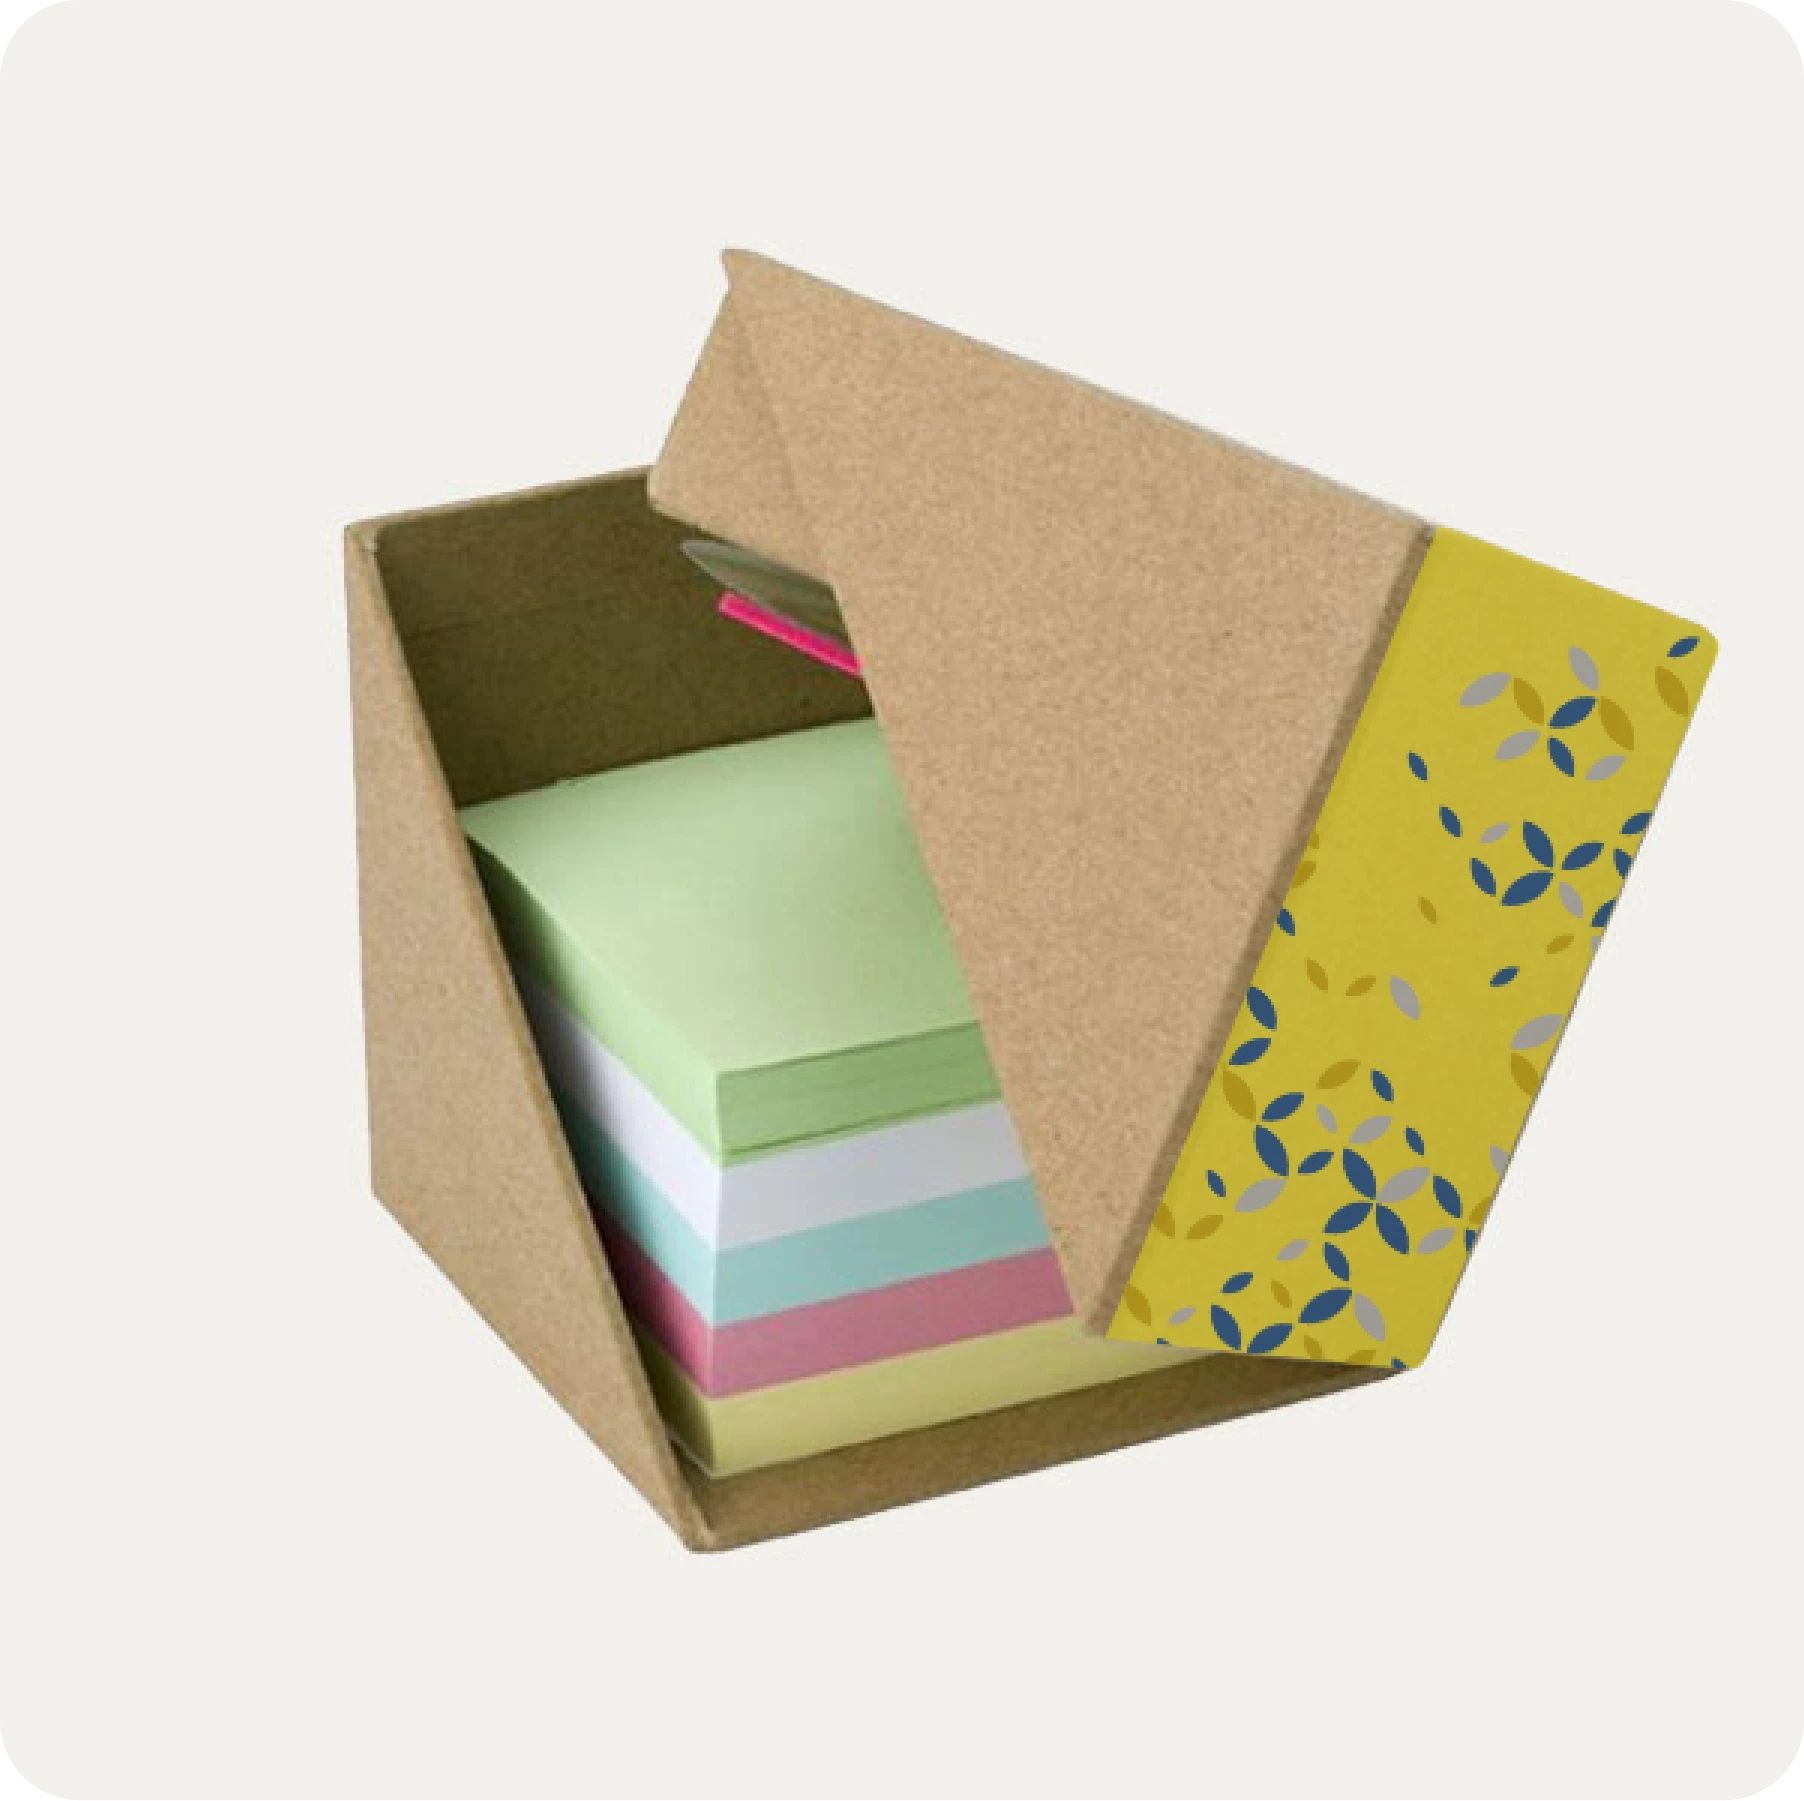 Custom Made Stationery Boxes for Personal and Business Use | The Box Lane